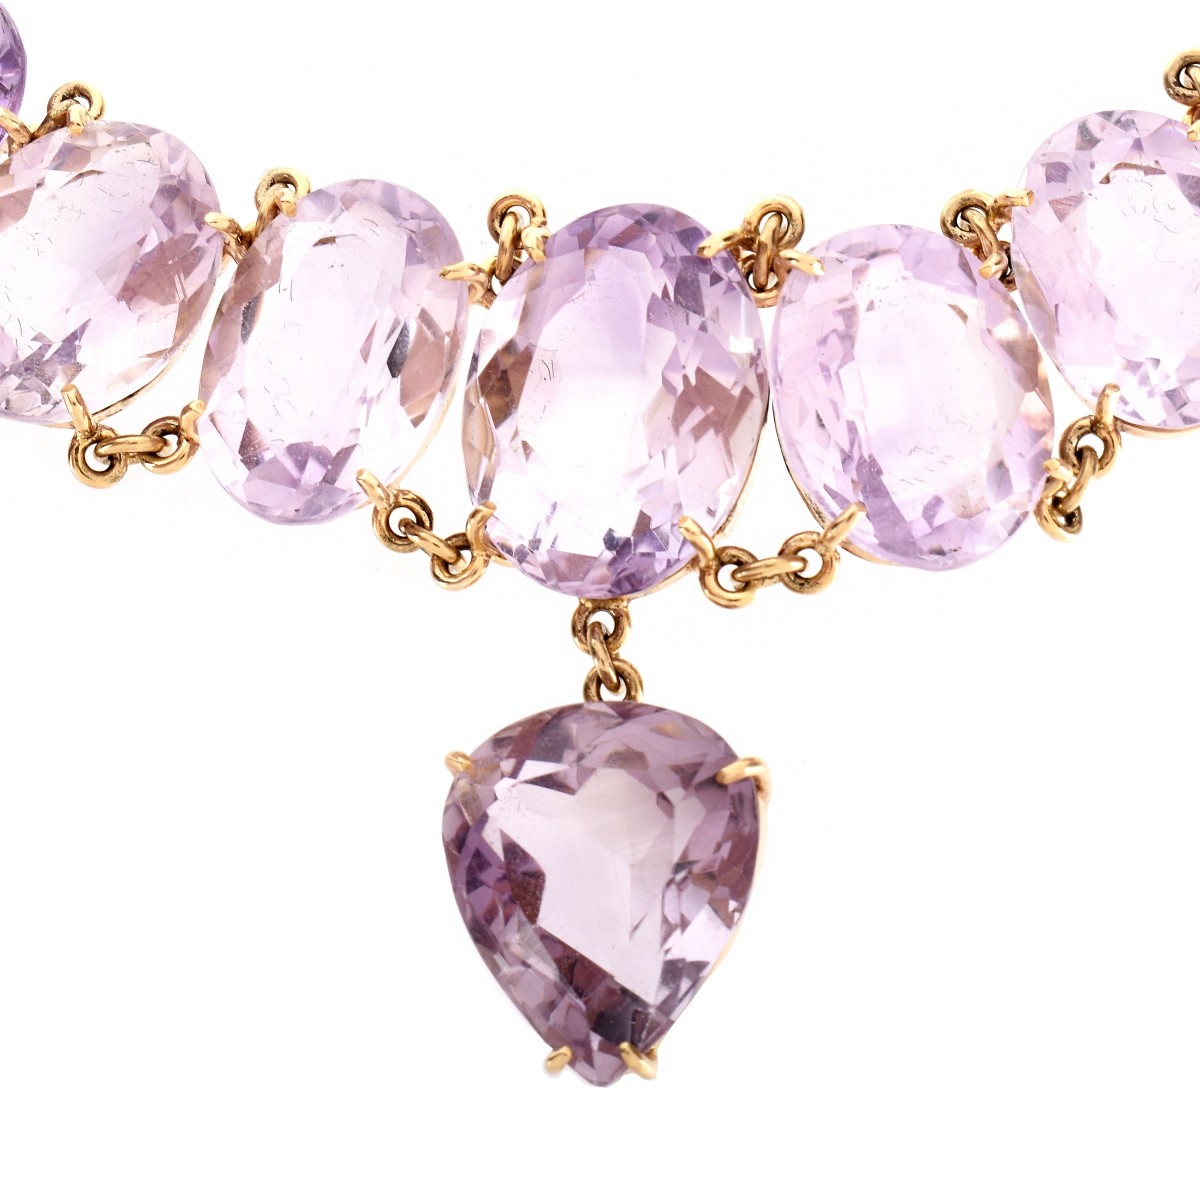 Approx. 300.00ct TW Amethyst and 14K Necklace